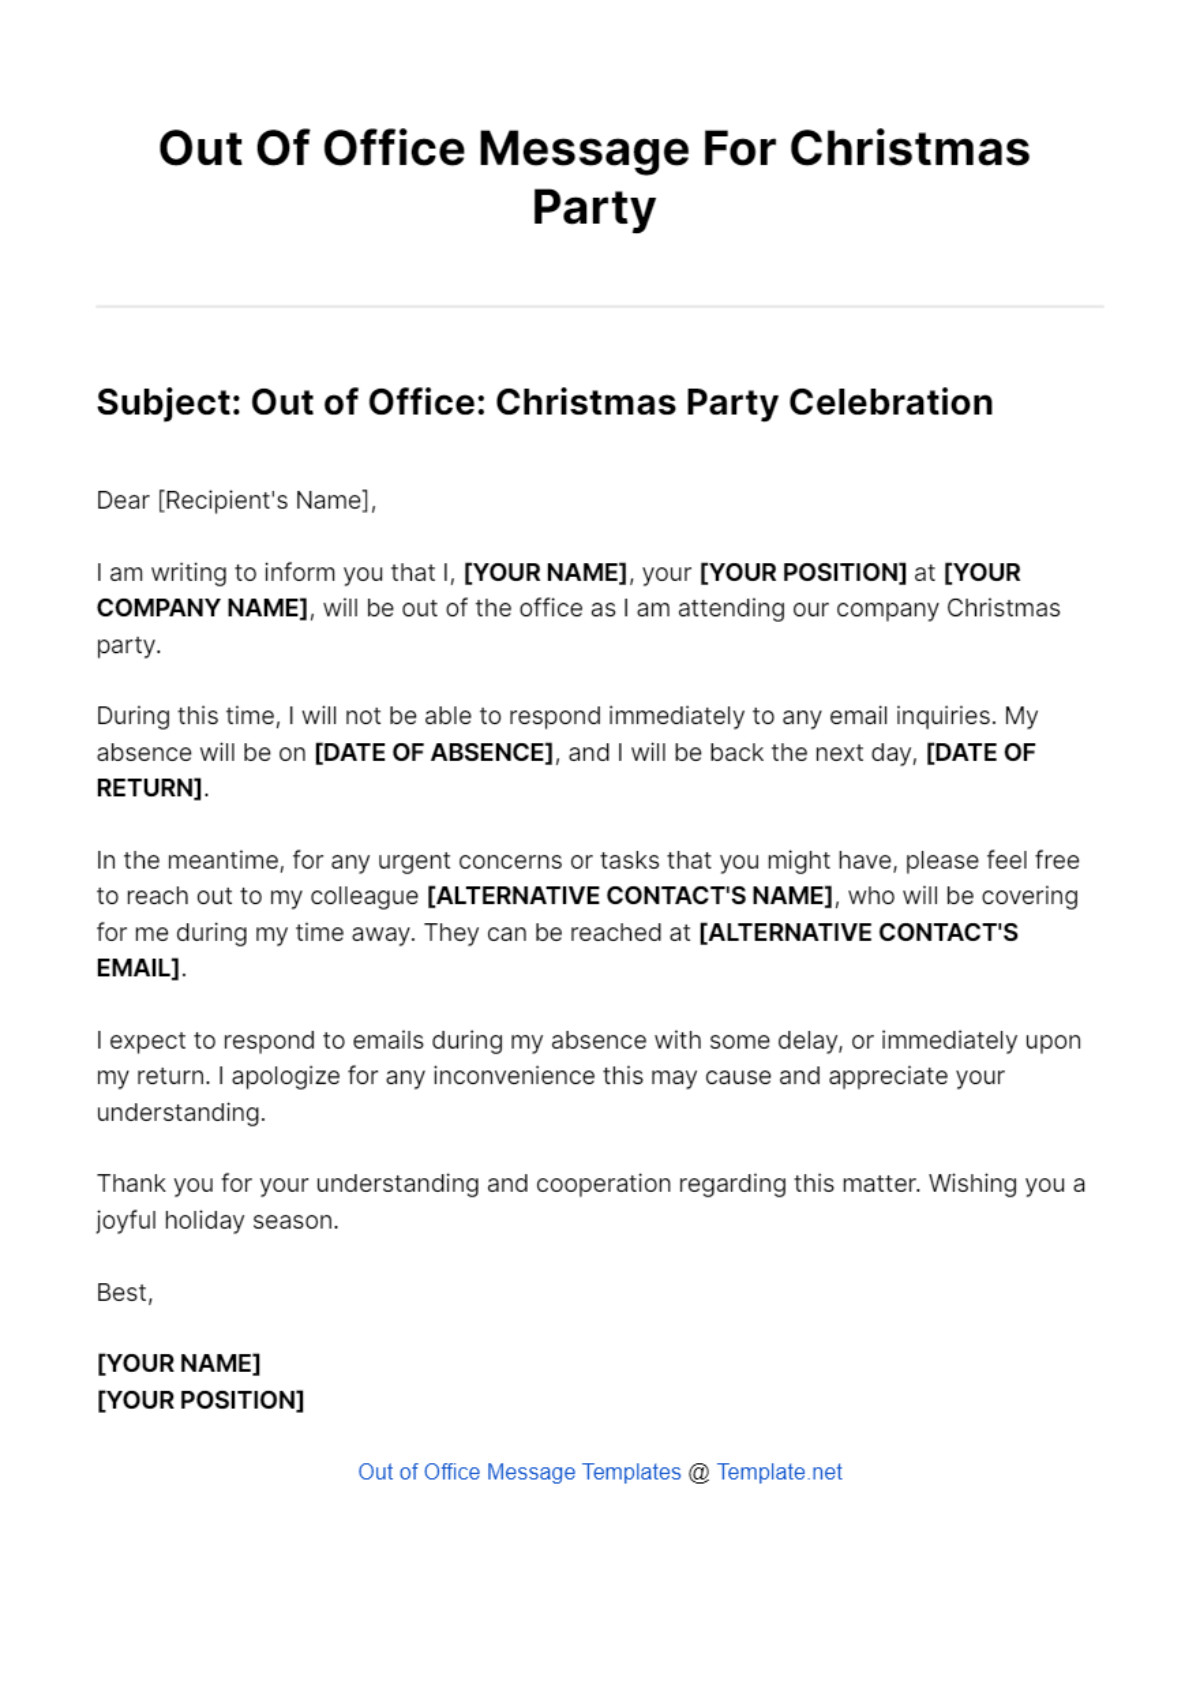 Out Of Office Message For Christmas Party Template